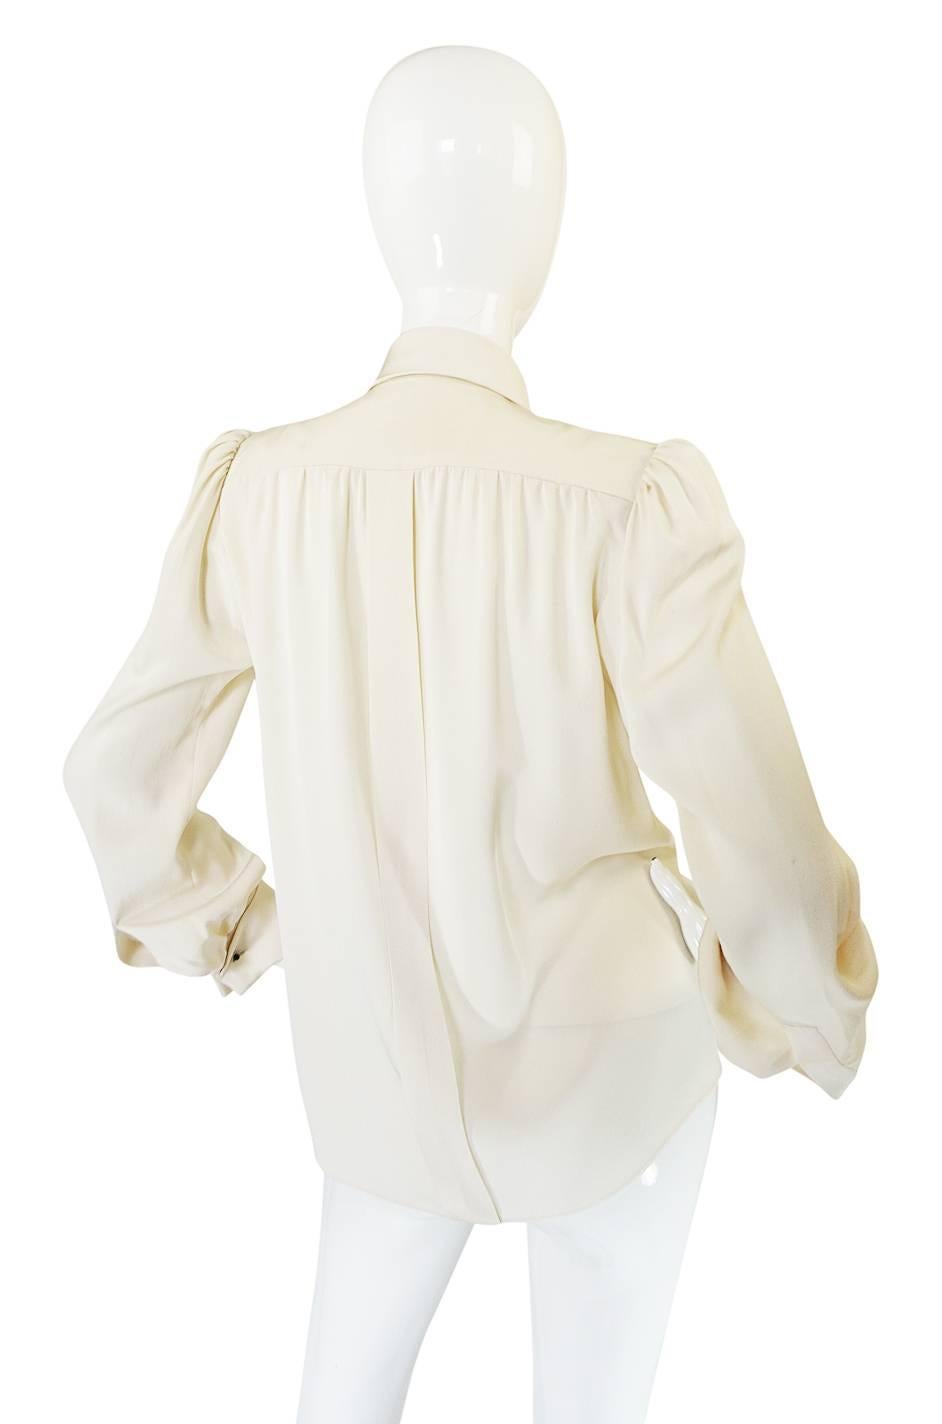 This beautiful silk blouse was produced and made by hand, under Yves Saint Laurent himself. It is a true treasure. Haute Couture is the very pinnacle of the fashion experience and I would hazard to say that vintage versions are even a little more